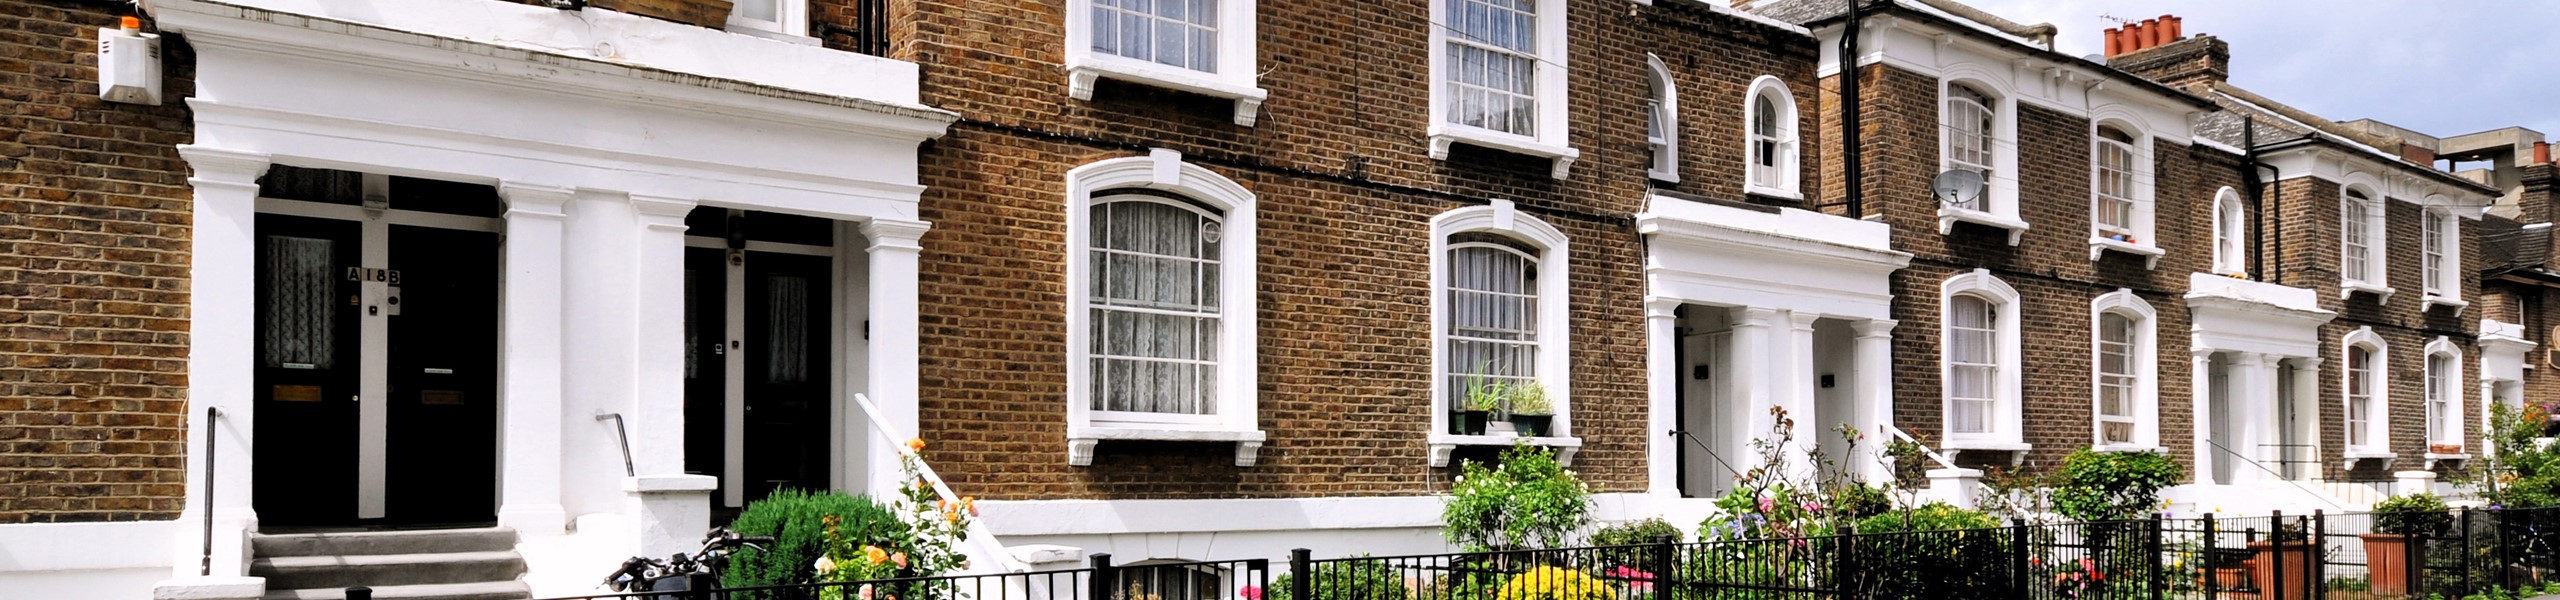 Buy-to-let landlords - have you paid your tax on income to HMRC?